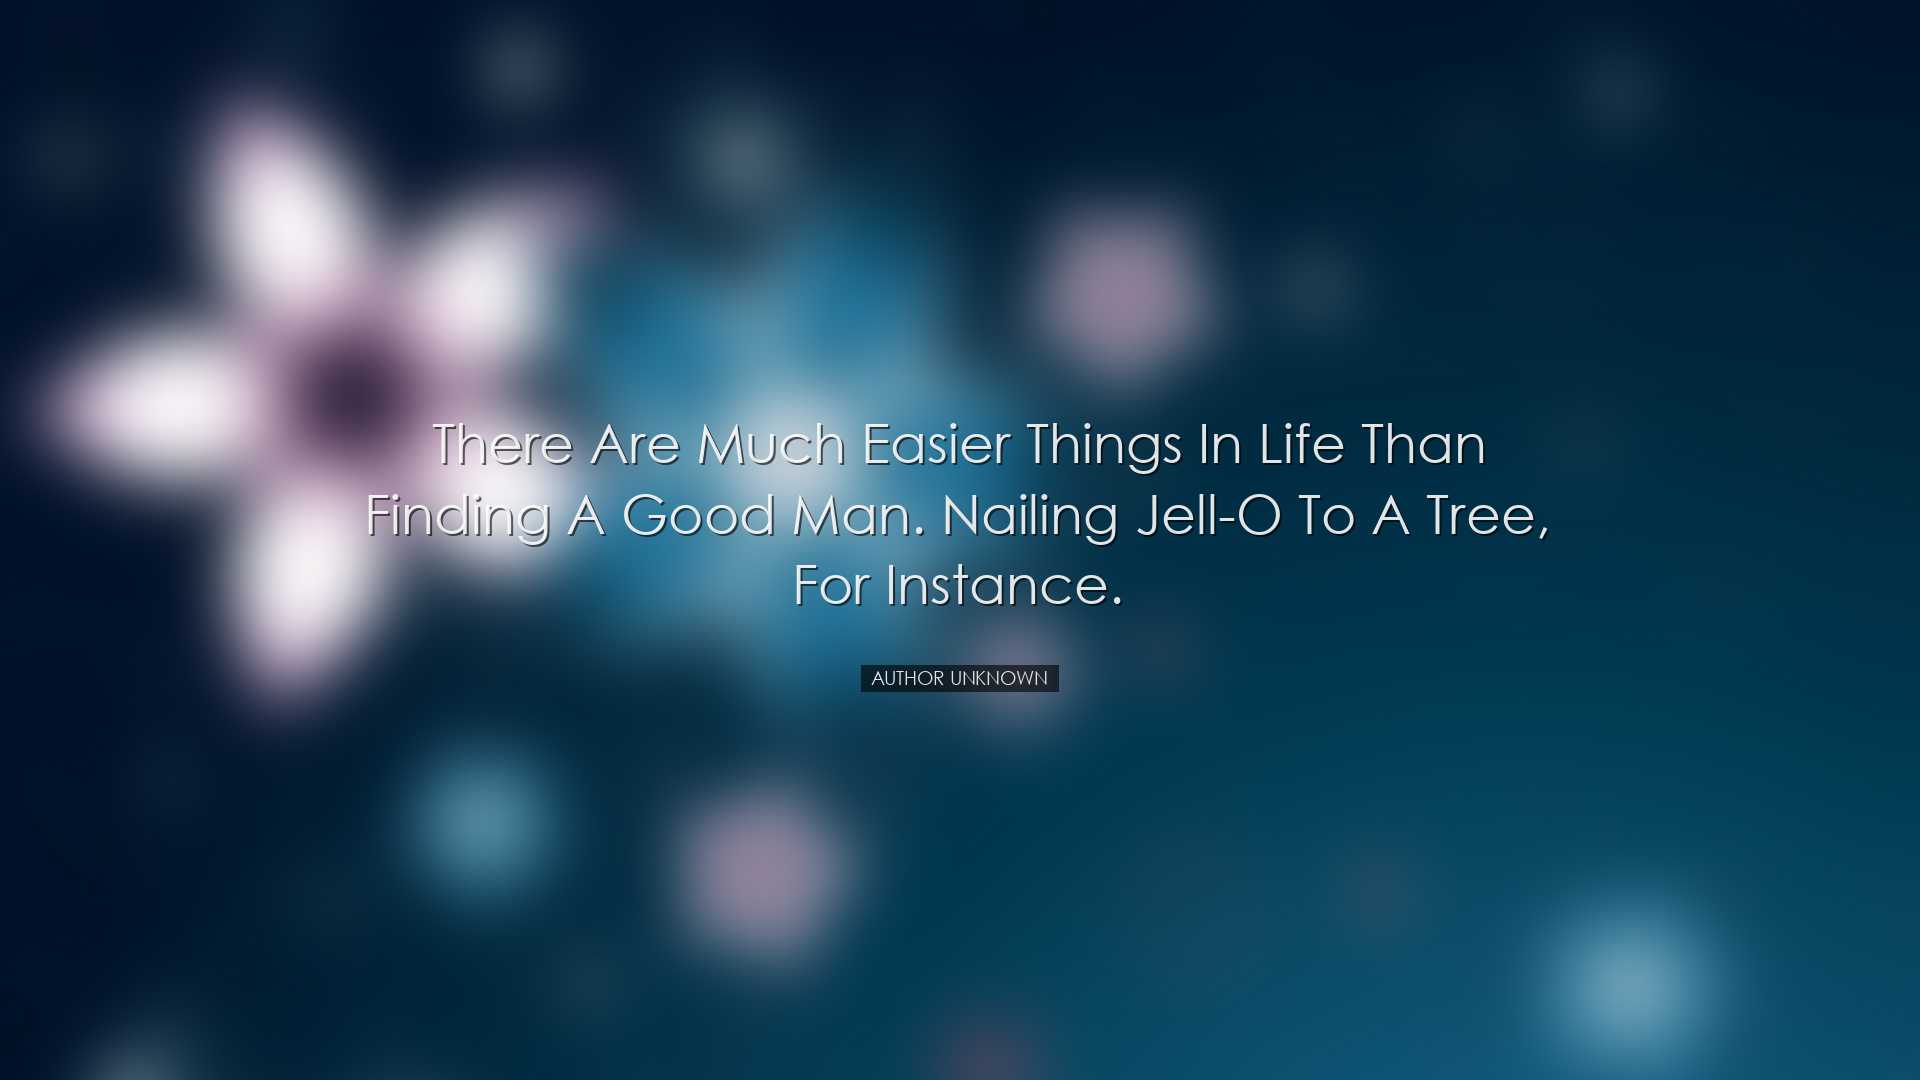 There are much easier things in life than finding a good man. Nail